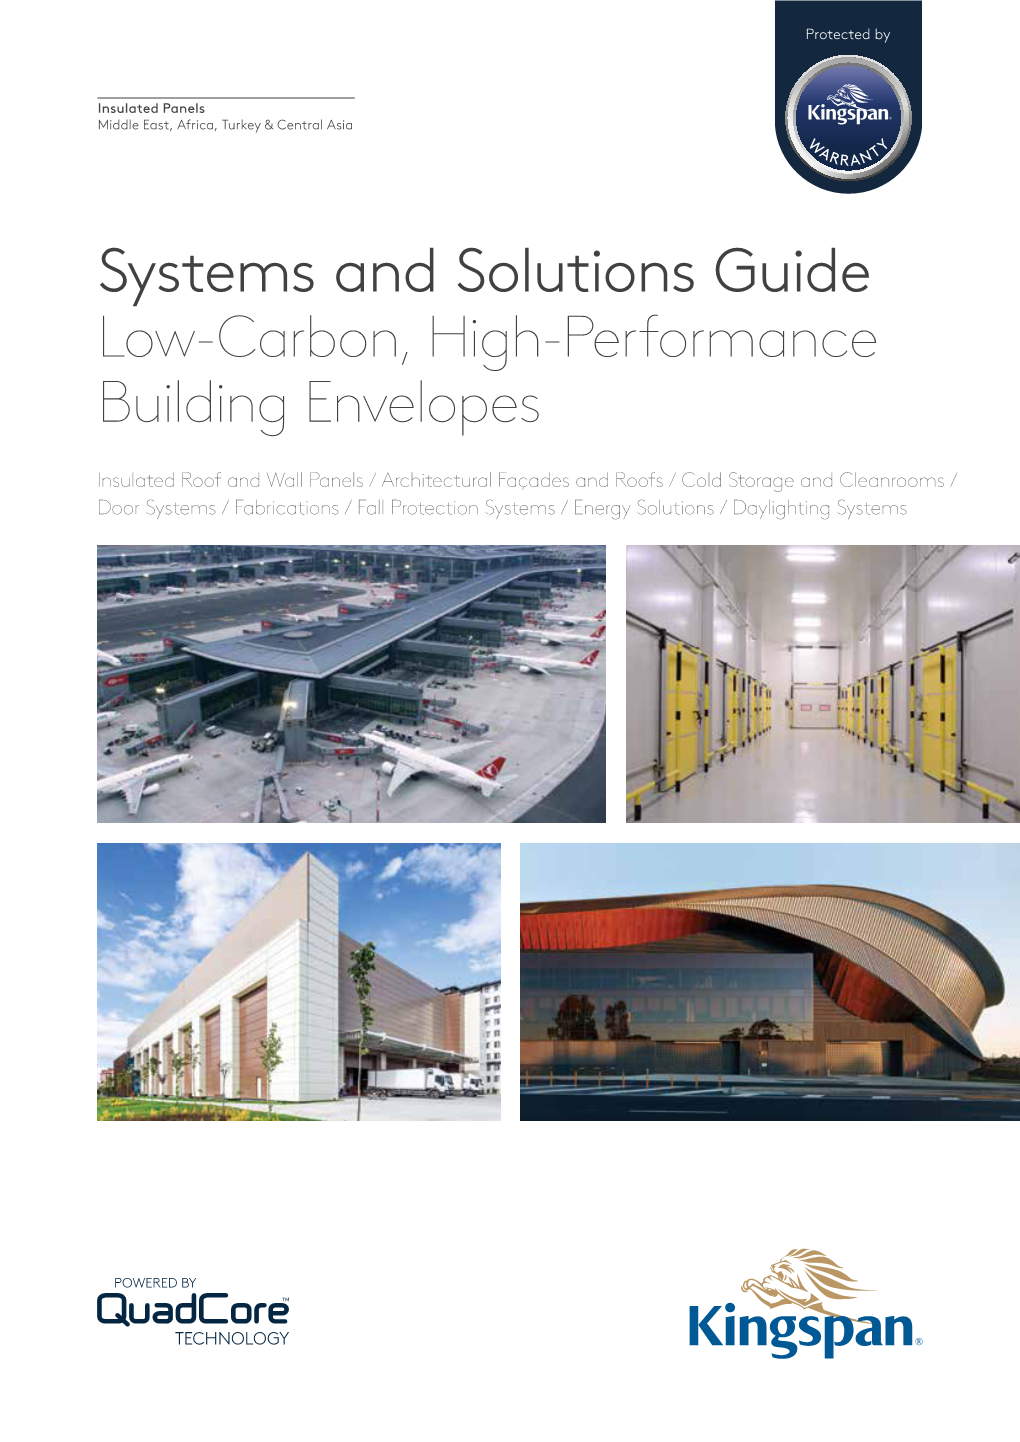 Systems and Solutions Guide Low-Carbon, High-Performance Building Envelopes